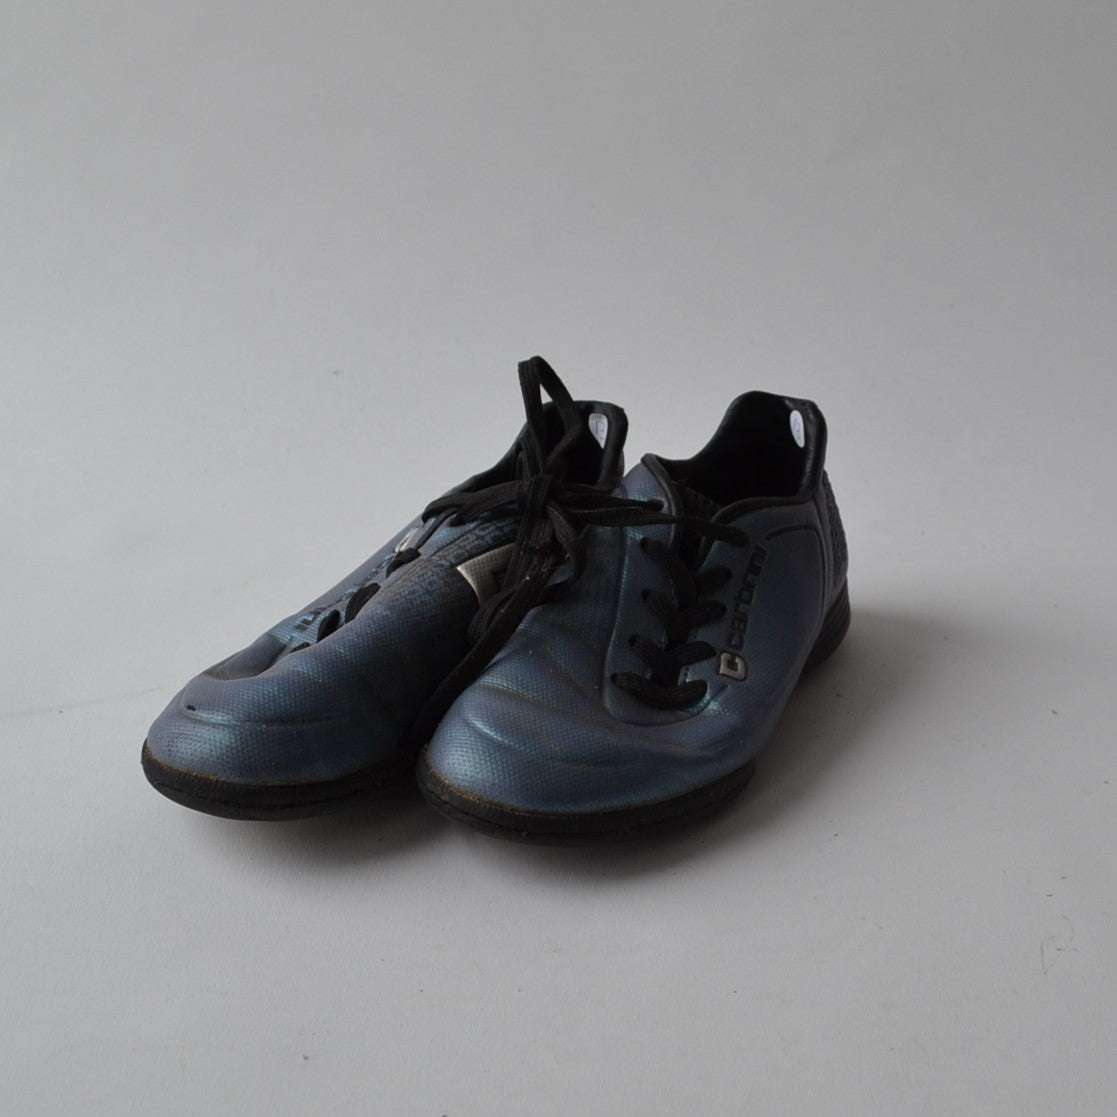 Steel Blue Astro Turf Football Boots Size 13